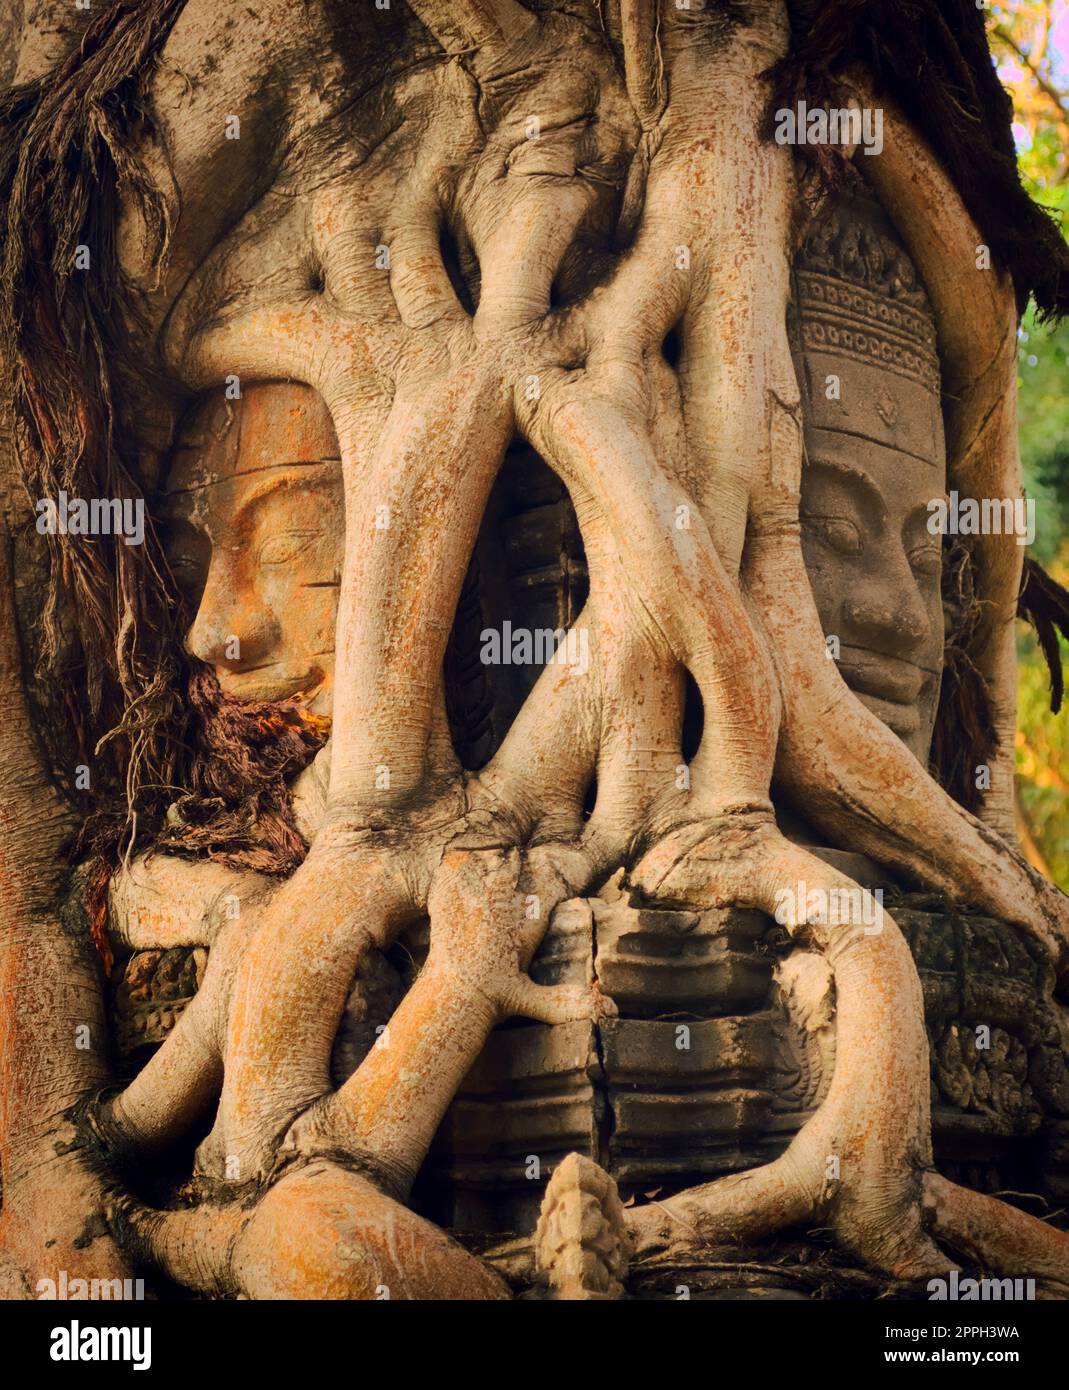 Ancient Khmer stone face sculpture trapped under overgrown roots at a temple in Siem Reap, Cambodia. Stock Photo